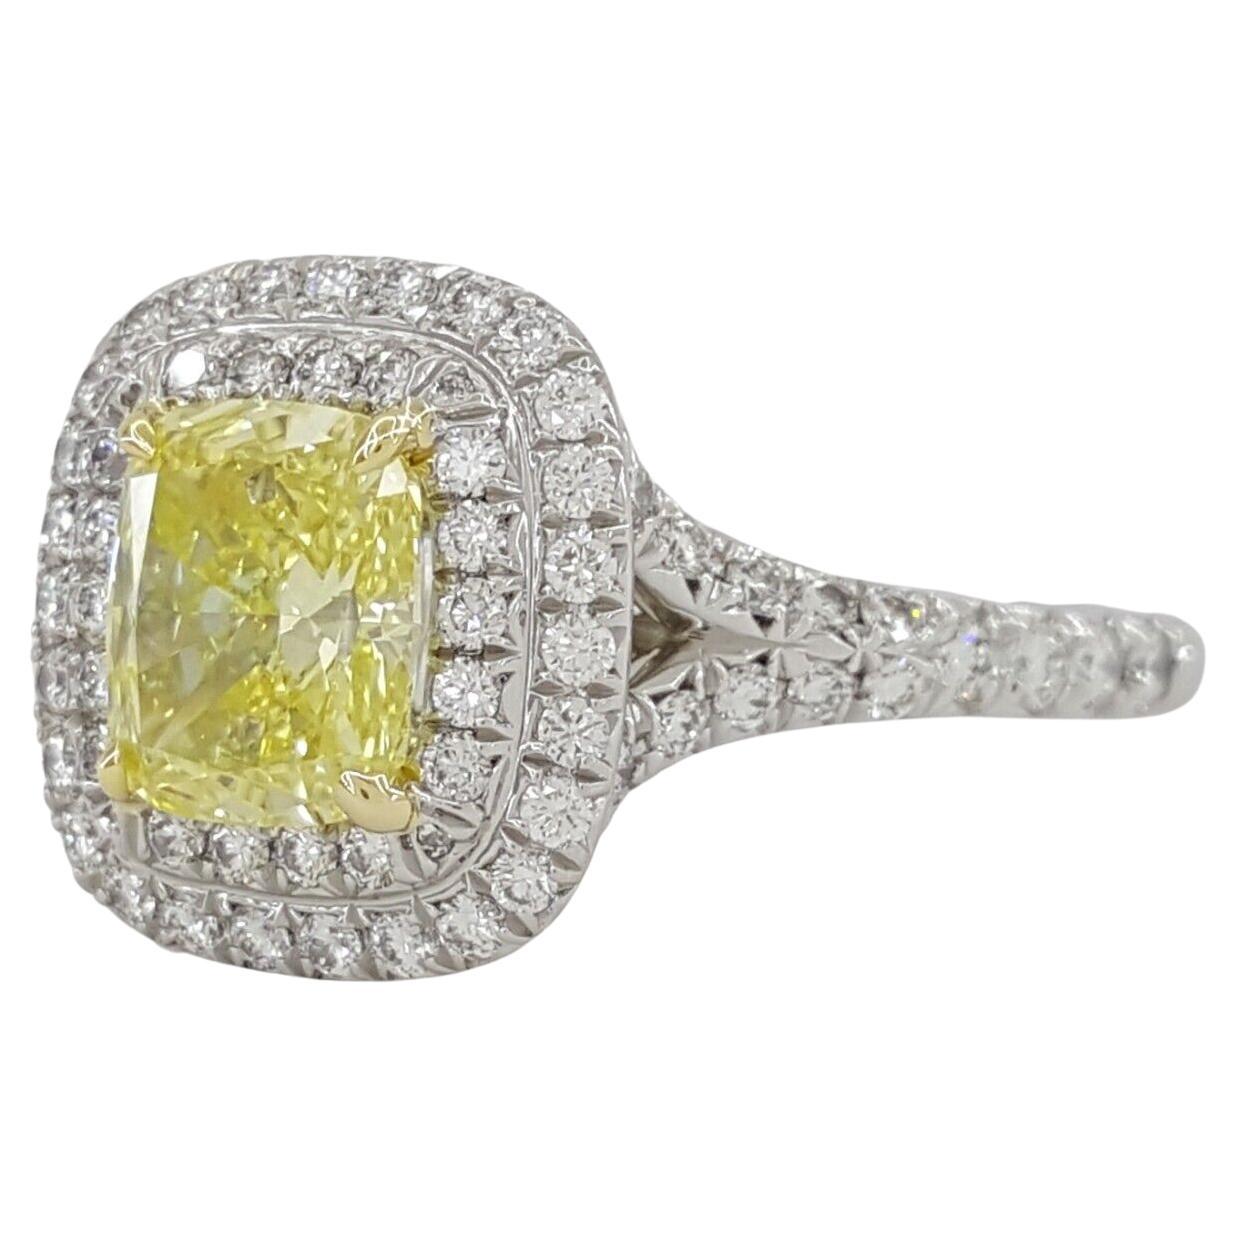 The ring weighs 5.3 grams, size 6.25, the center stone is a Natural Fancy Yellow Cushion Brilliant Cut Diamond Weighing 1.10 ct, Fancy Yellow in Color, VS2 in clarity, Excellent Cut, Excellent Polish, Very Good Symmetry, None Fluorescence, with